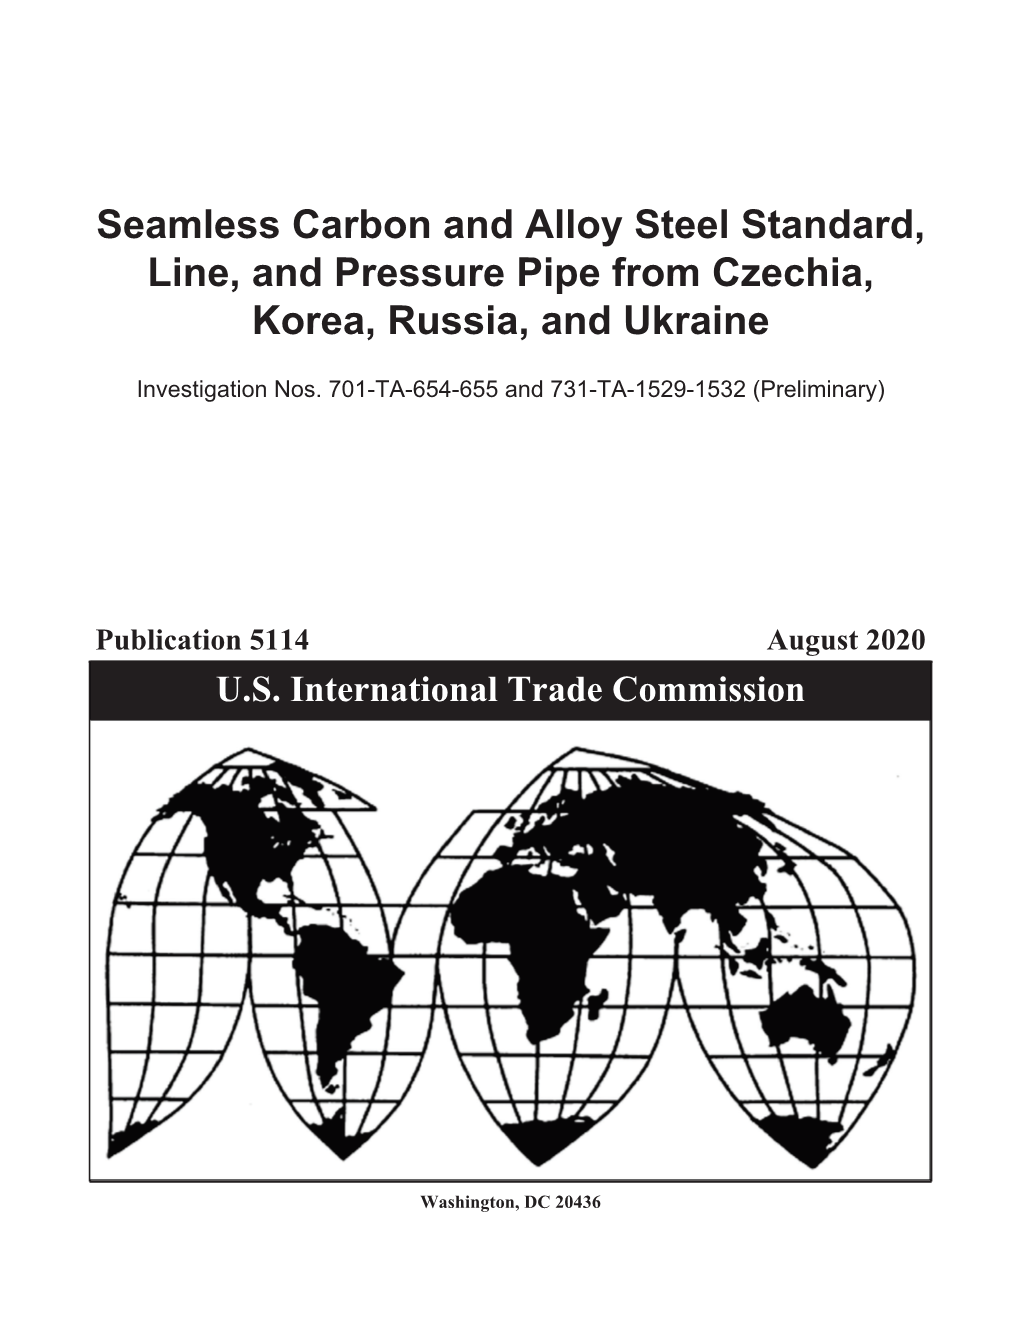 Seamless Carbon and Alloy Steel Standard, Line, and Pressure Pipe from Czechia, Korea, Russia, and Ukraine